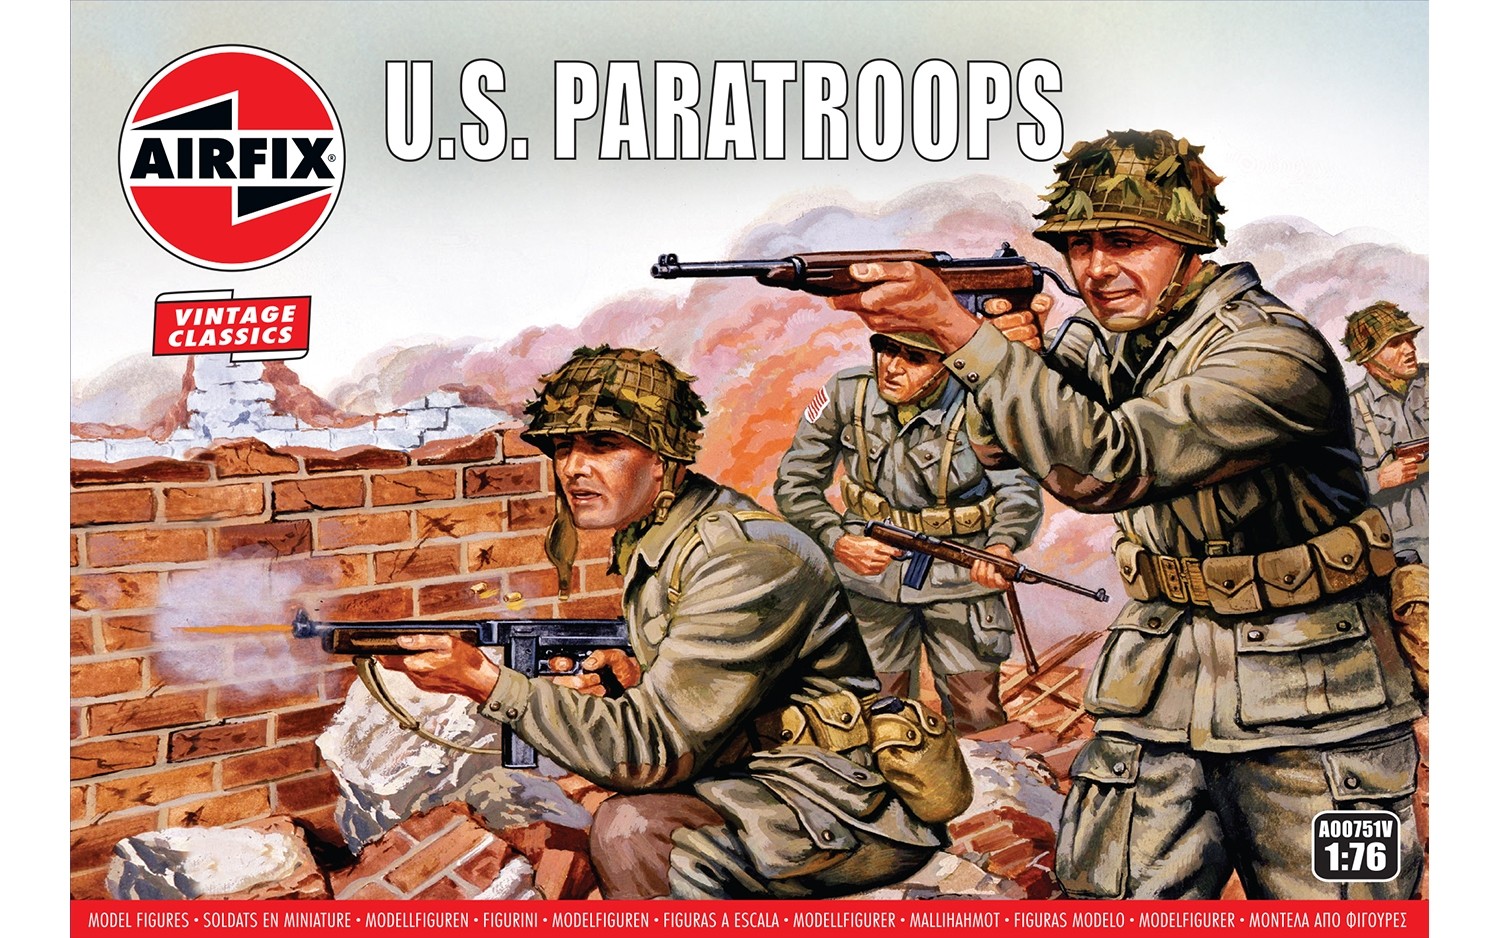 Airfix A00751V Vintage Classics WWII US Paratroops 1:76 ###